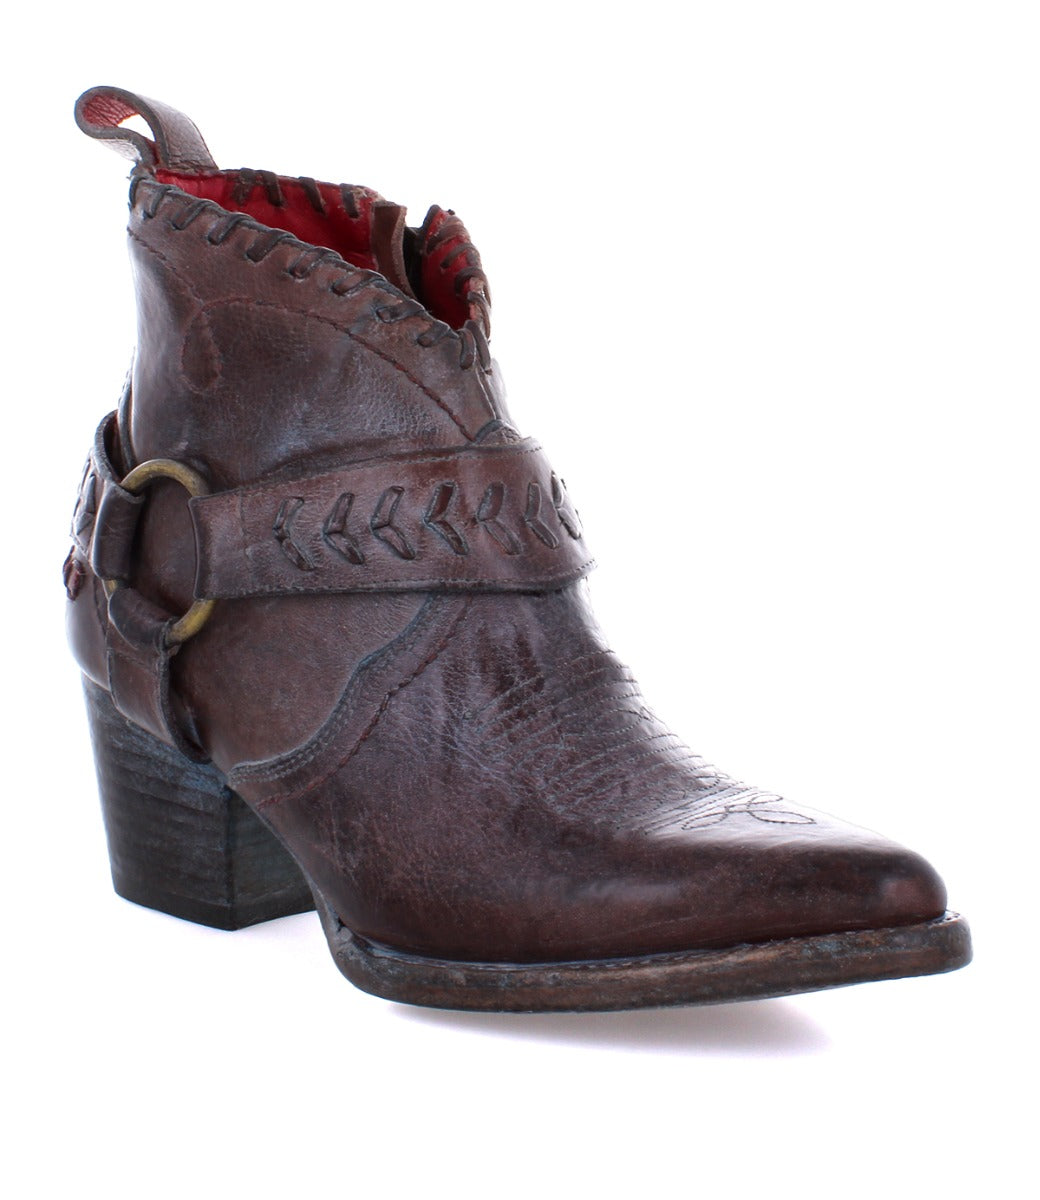 A women's brown cowboy boot with a buckle, the Bed Stu Tania.